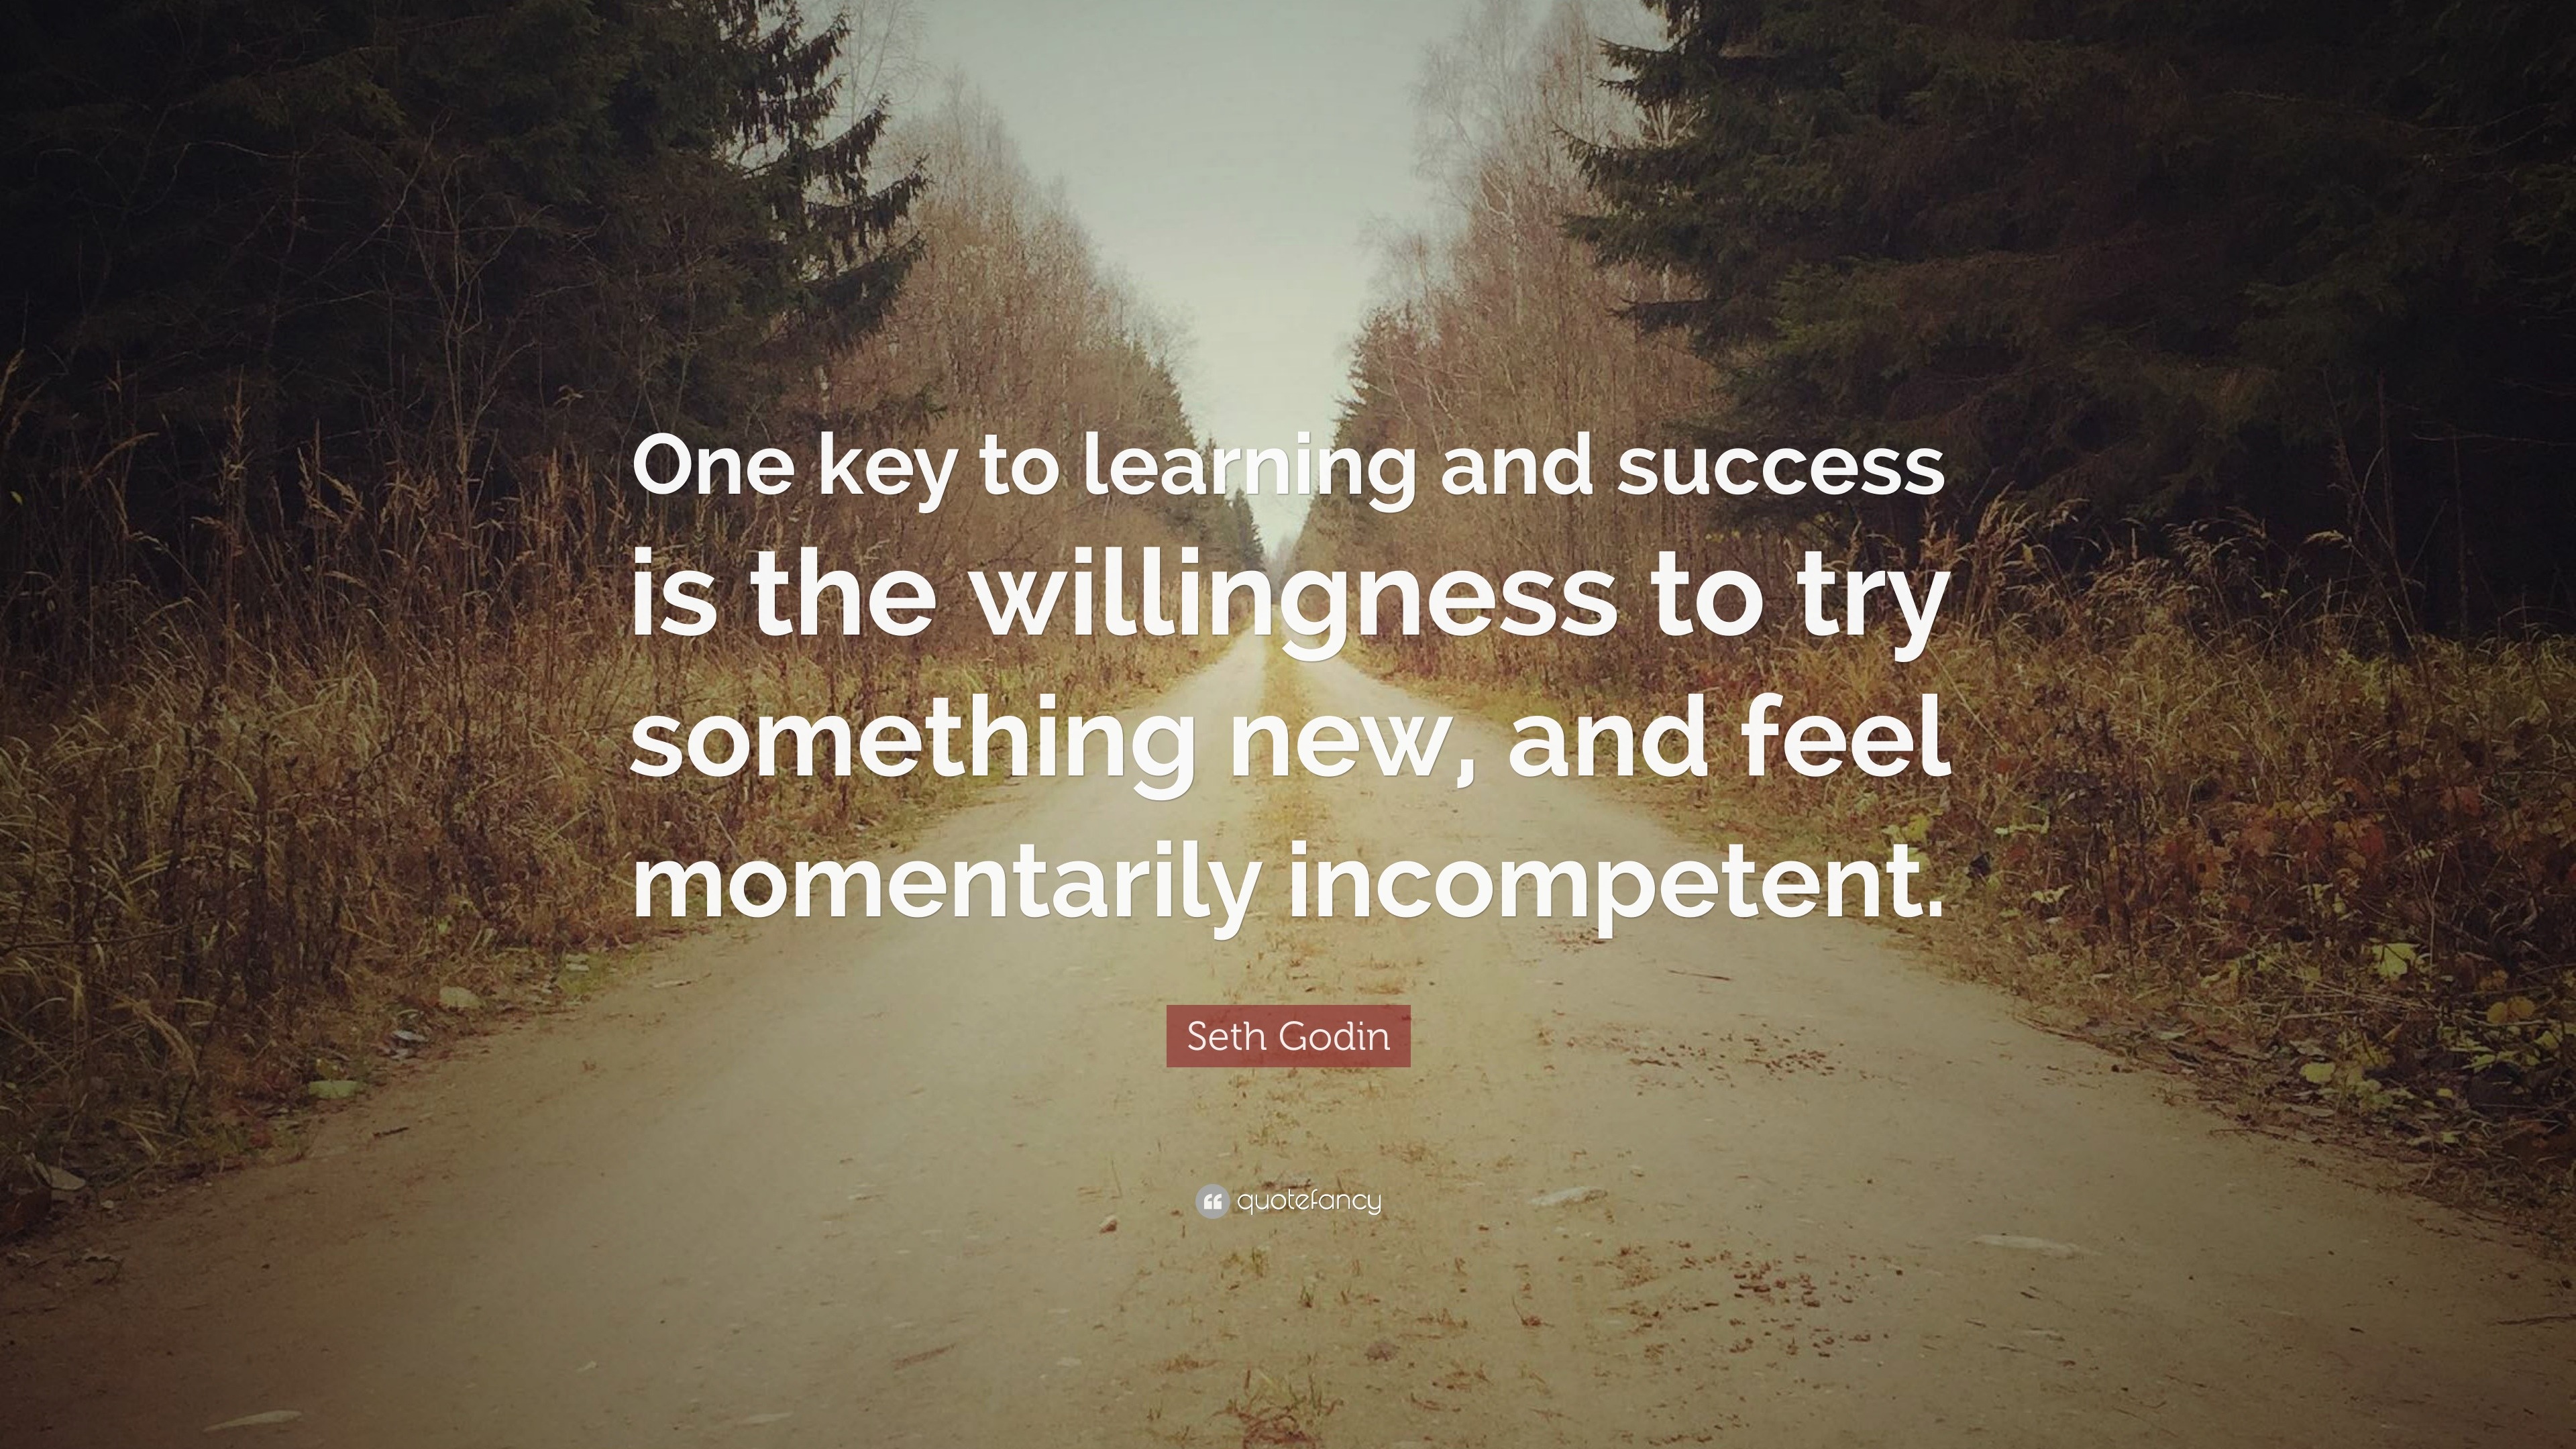 Seth Godin Quote: “One key to learning and success is the willingness ...